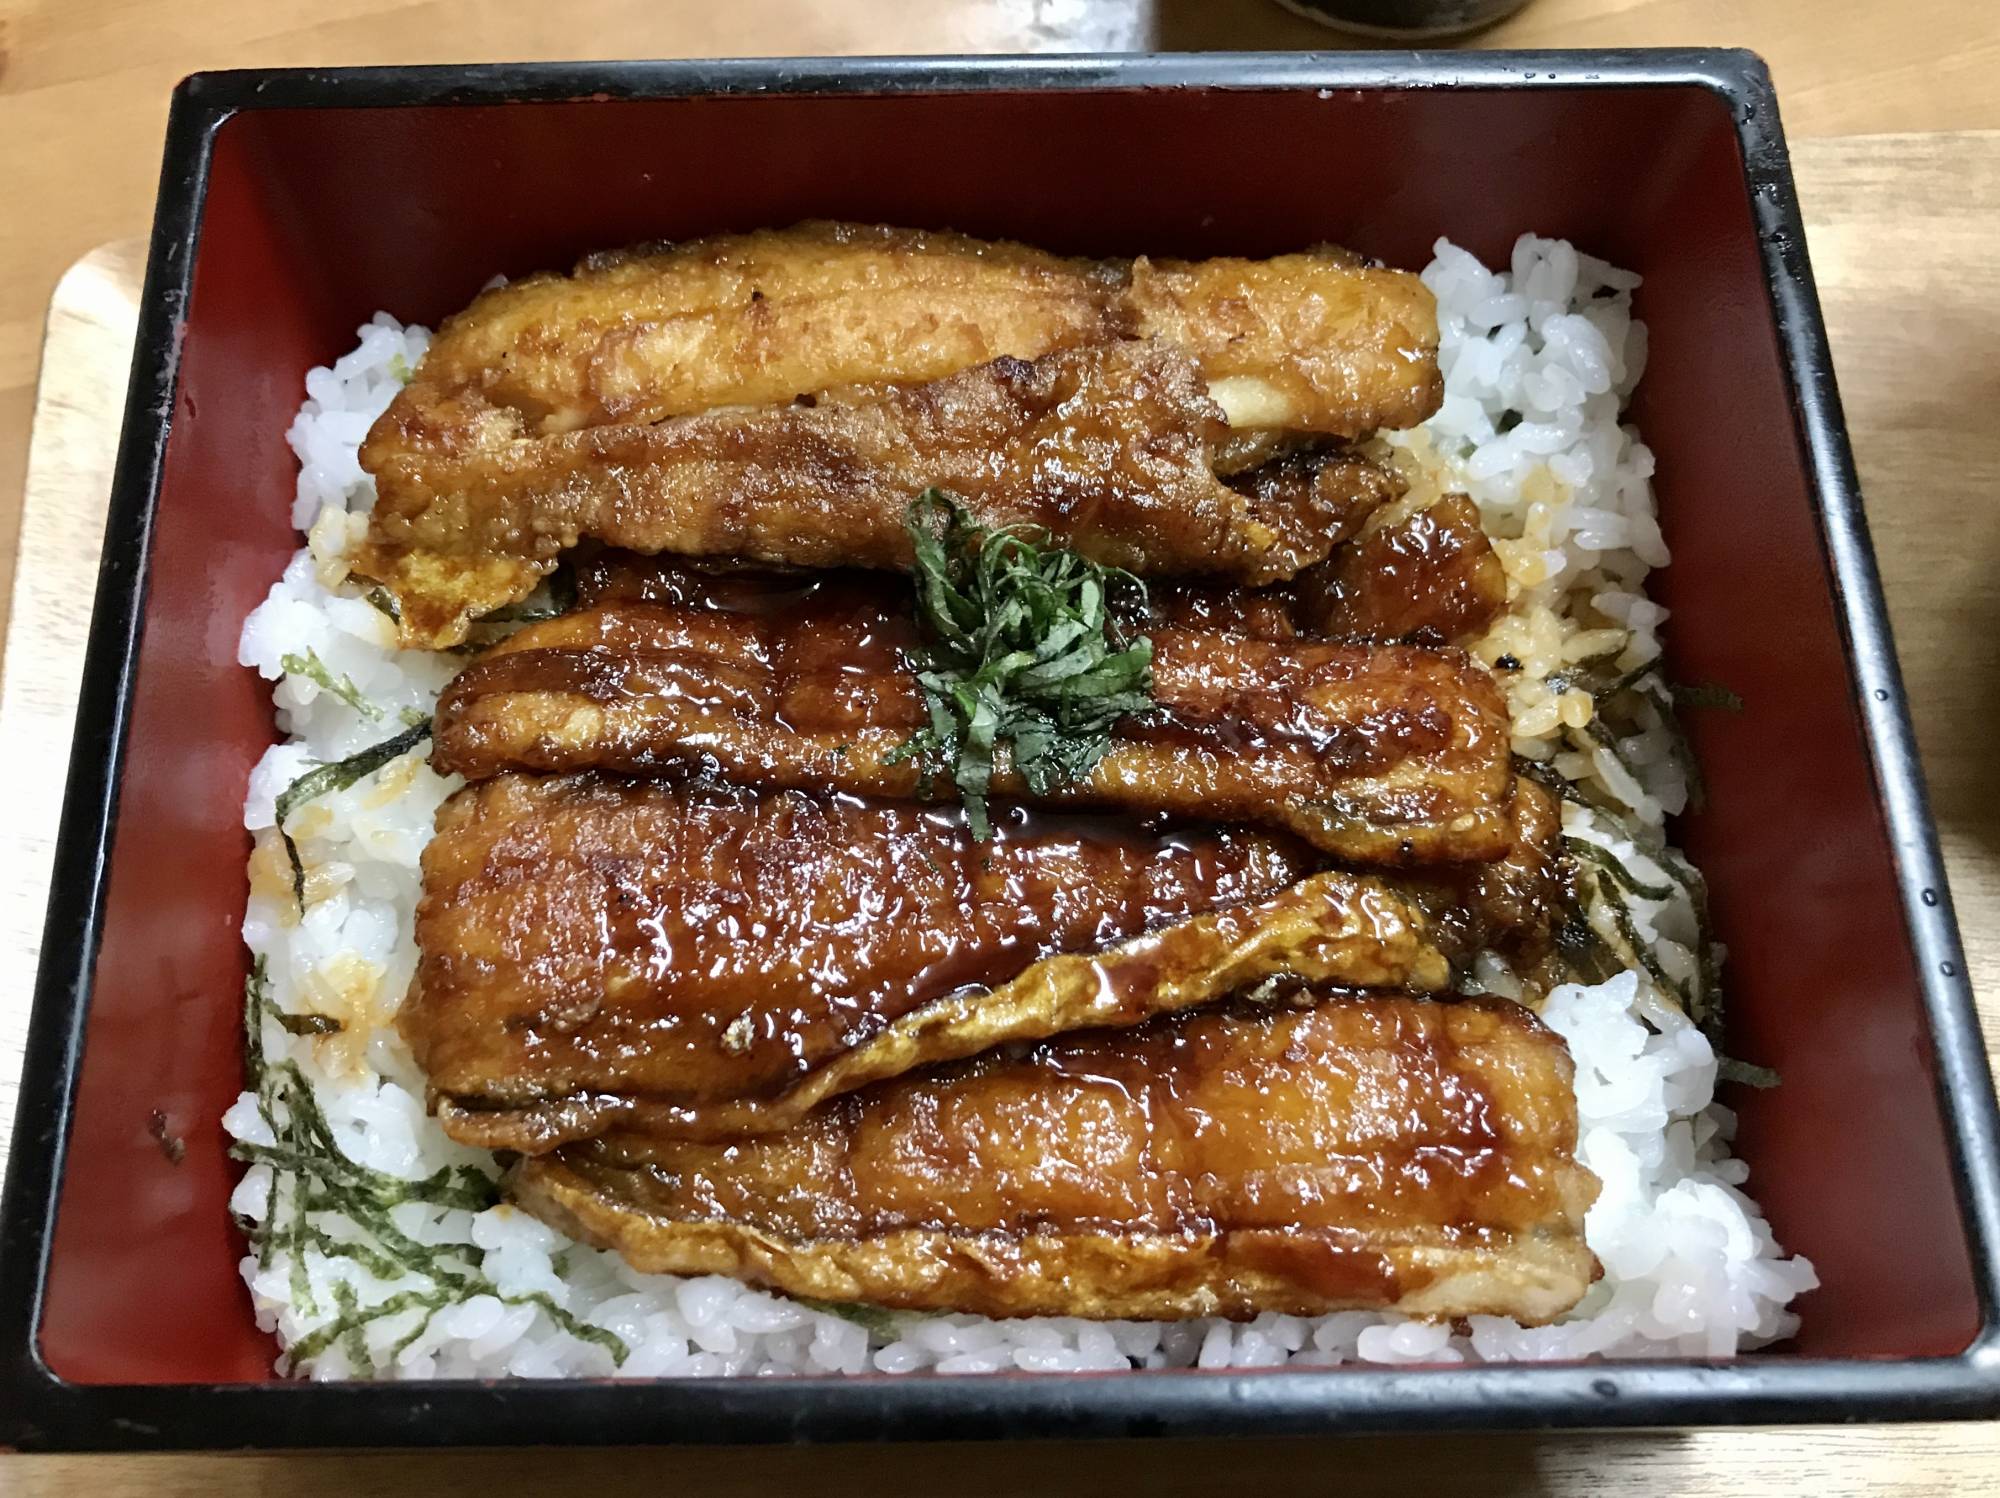 Better than unagi: Usami’s take on the classic unajū (grilled freshwater eel rice bowl) swaps out expensive eel for deliciously meaty silver beltfish, locally fished in Usuki. | FLORENTYNA LEOW